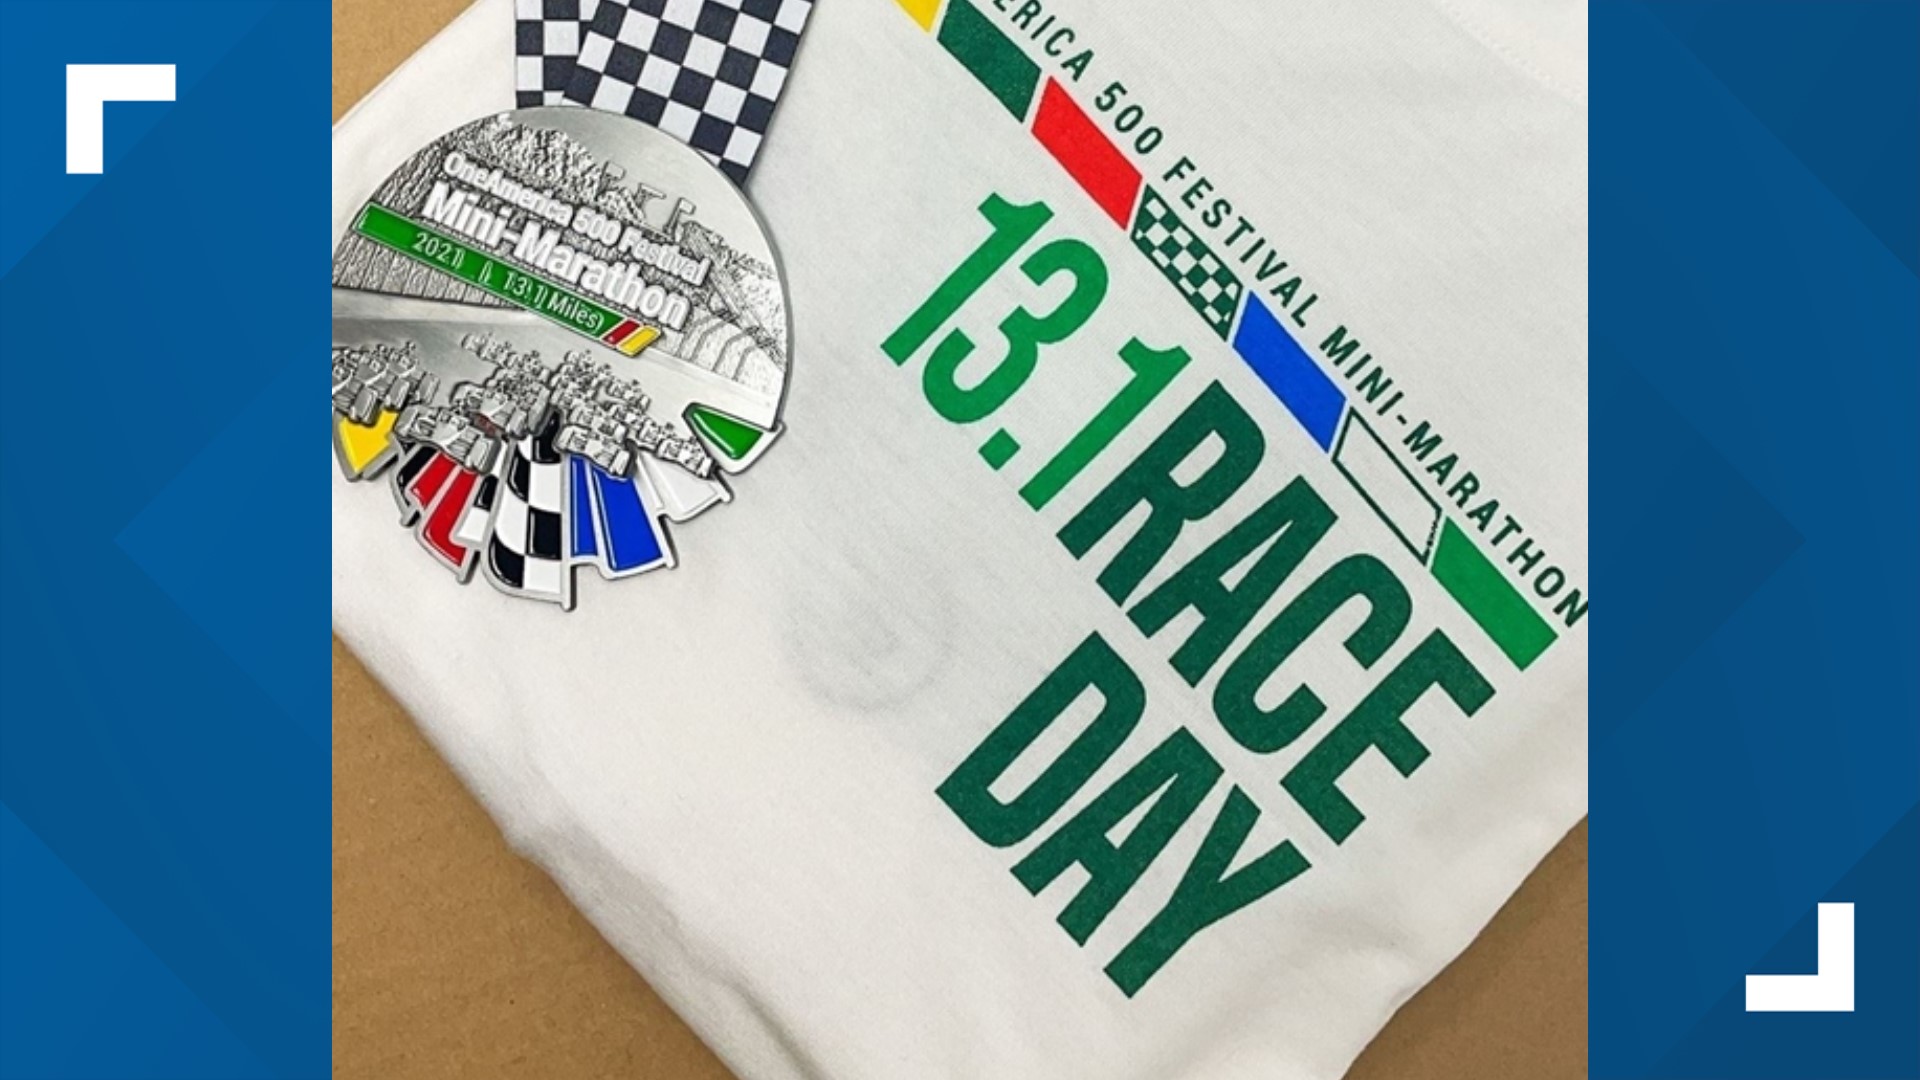 The 500 Festival revealed this year's participant shirts and finishers' medals on Wednesday.